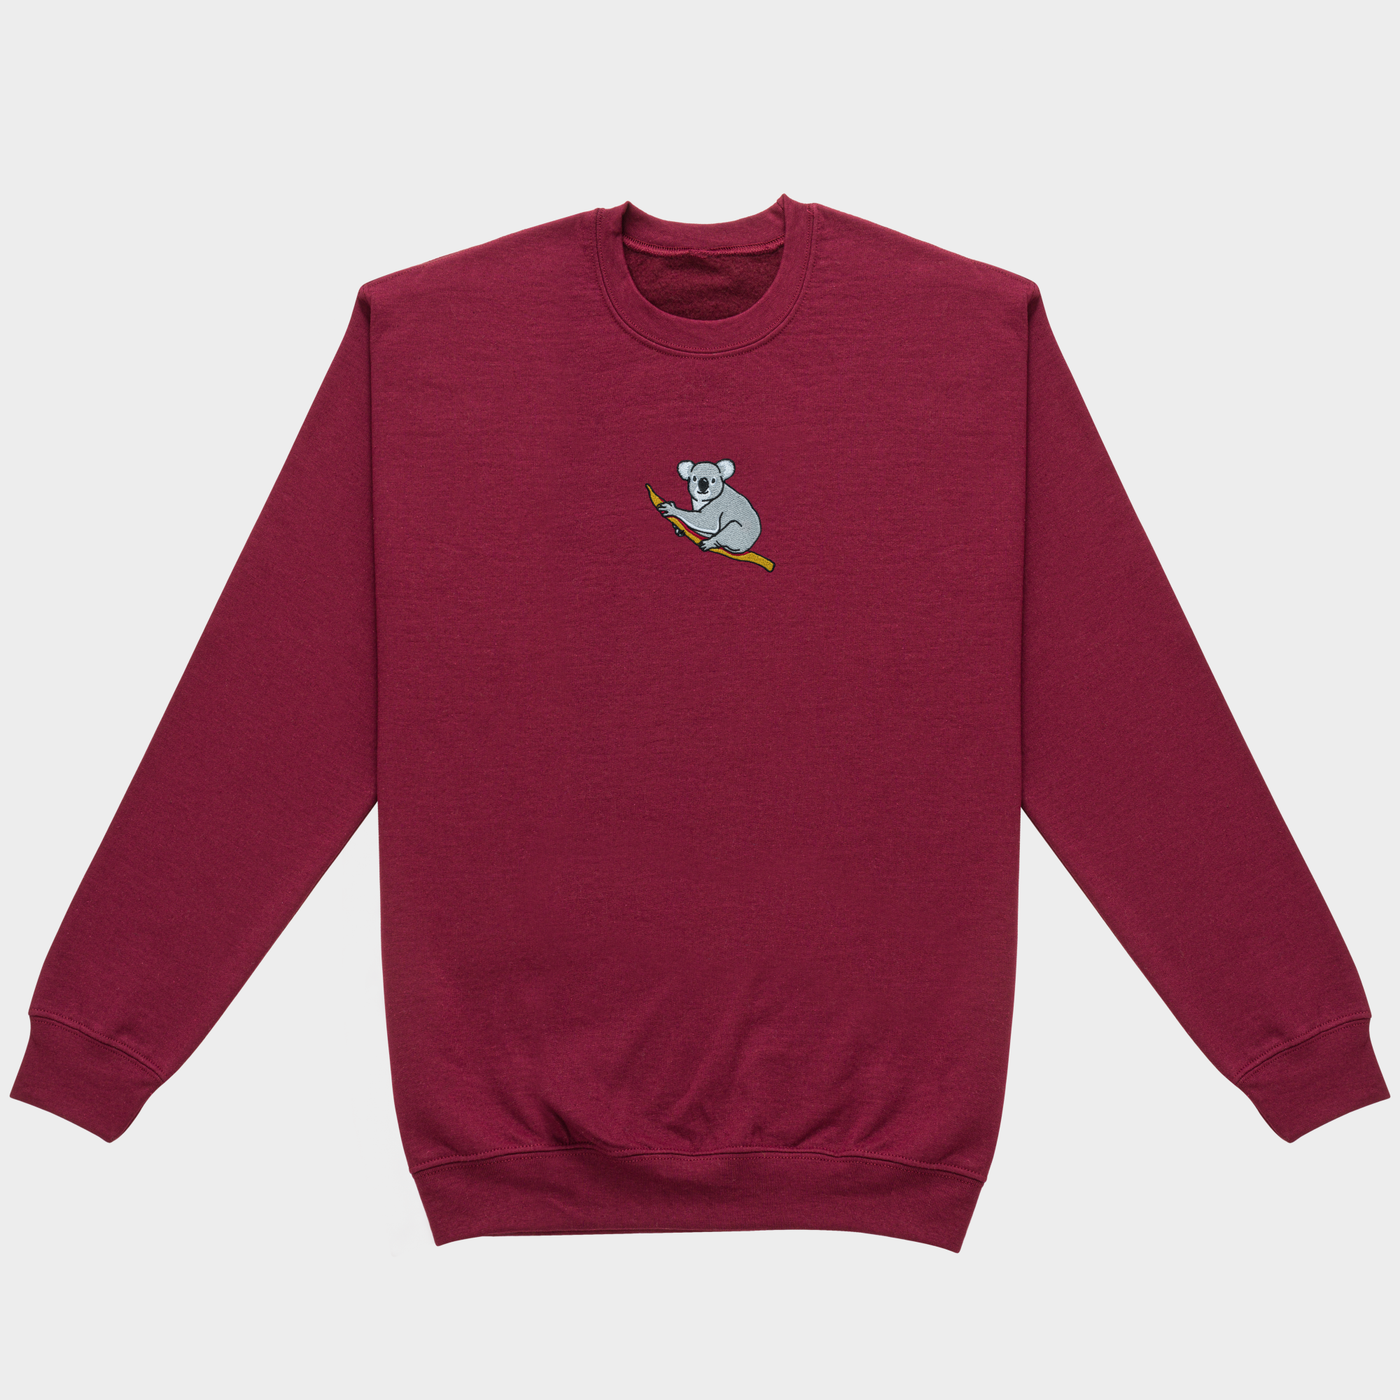 Bobby's Planet Men's Embroidered Koala Sweatshirt from Australia Down Under Animals Collection in Maroon Color#color_maroon